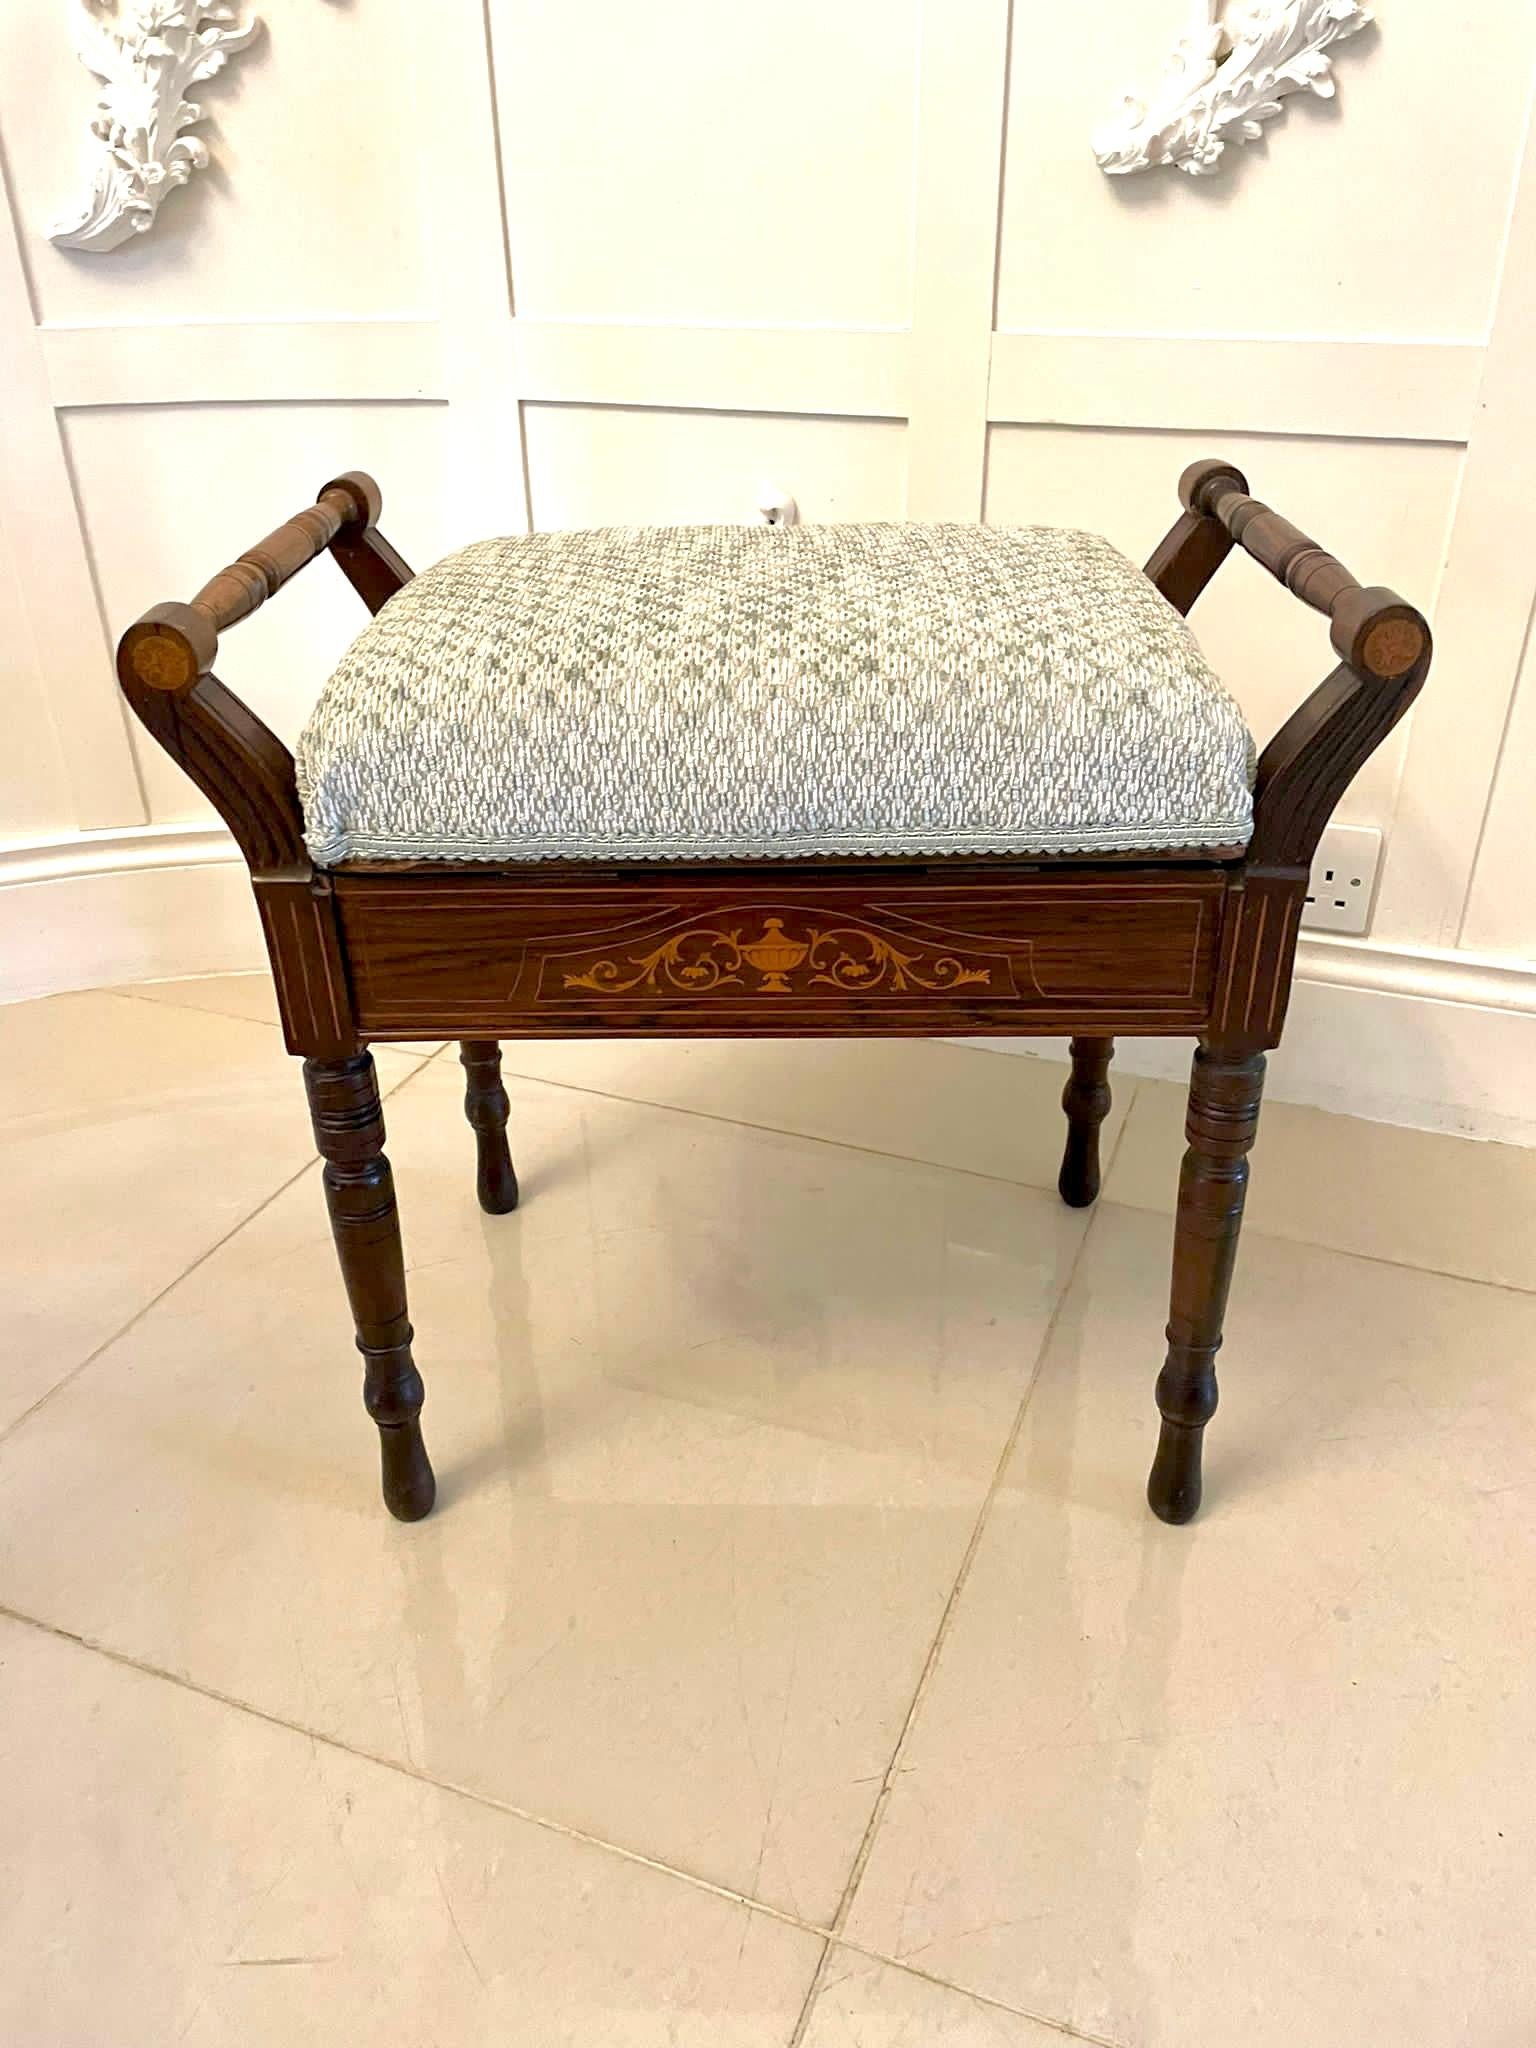 Antique Edwardian freestanding quality rosewood inlaid piano stool having a newly reupholstered lift up seat in a quality fabric above a freestanding quality inlaid rosewood frieze, two turned carrying handles supported by pretty shaped inlaid